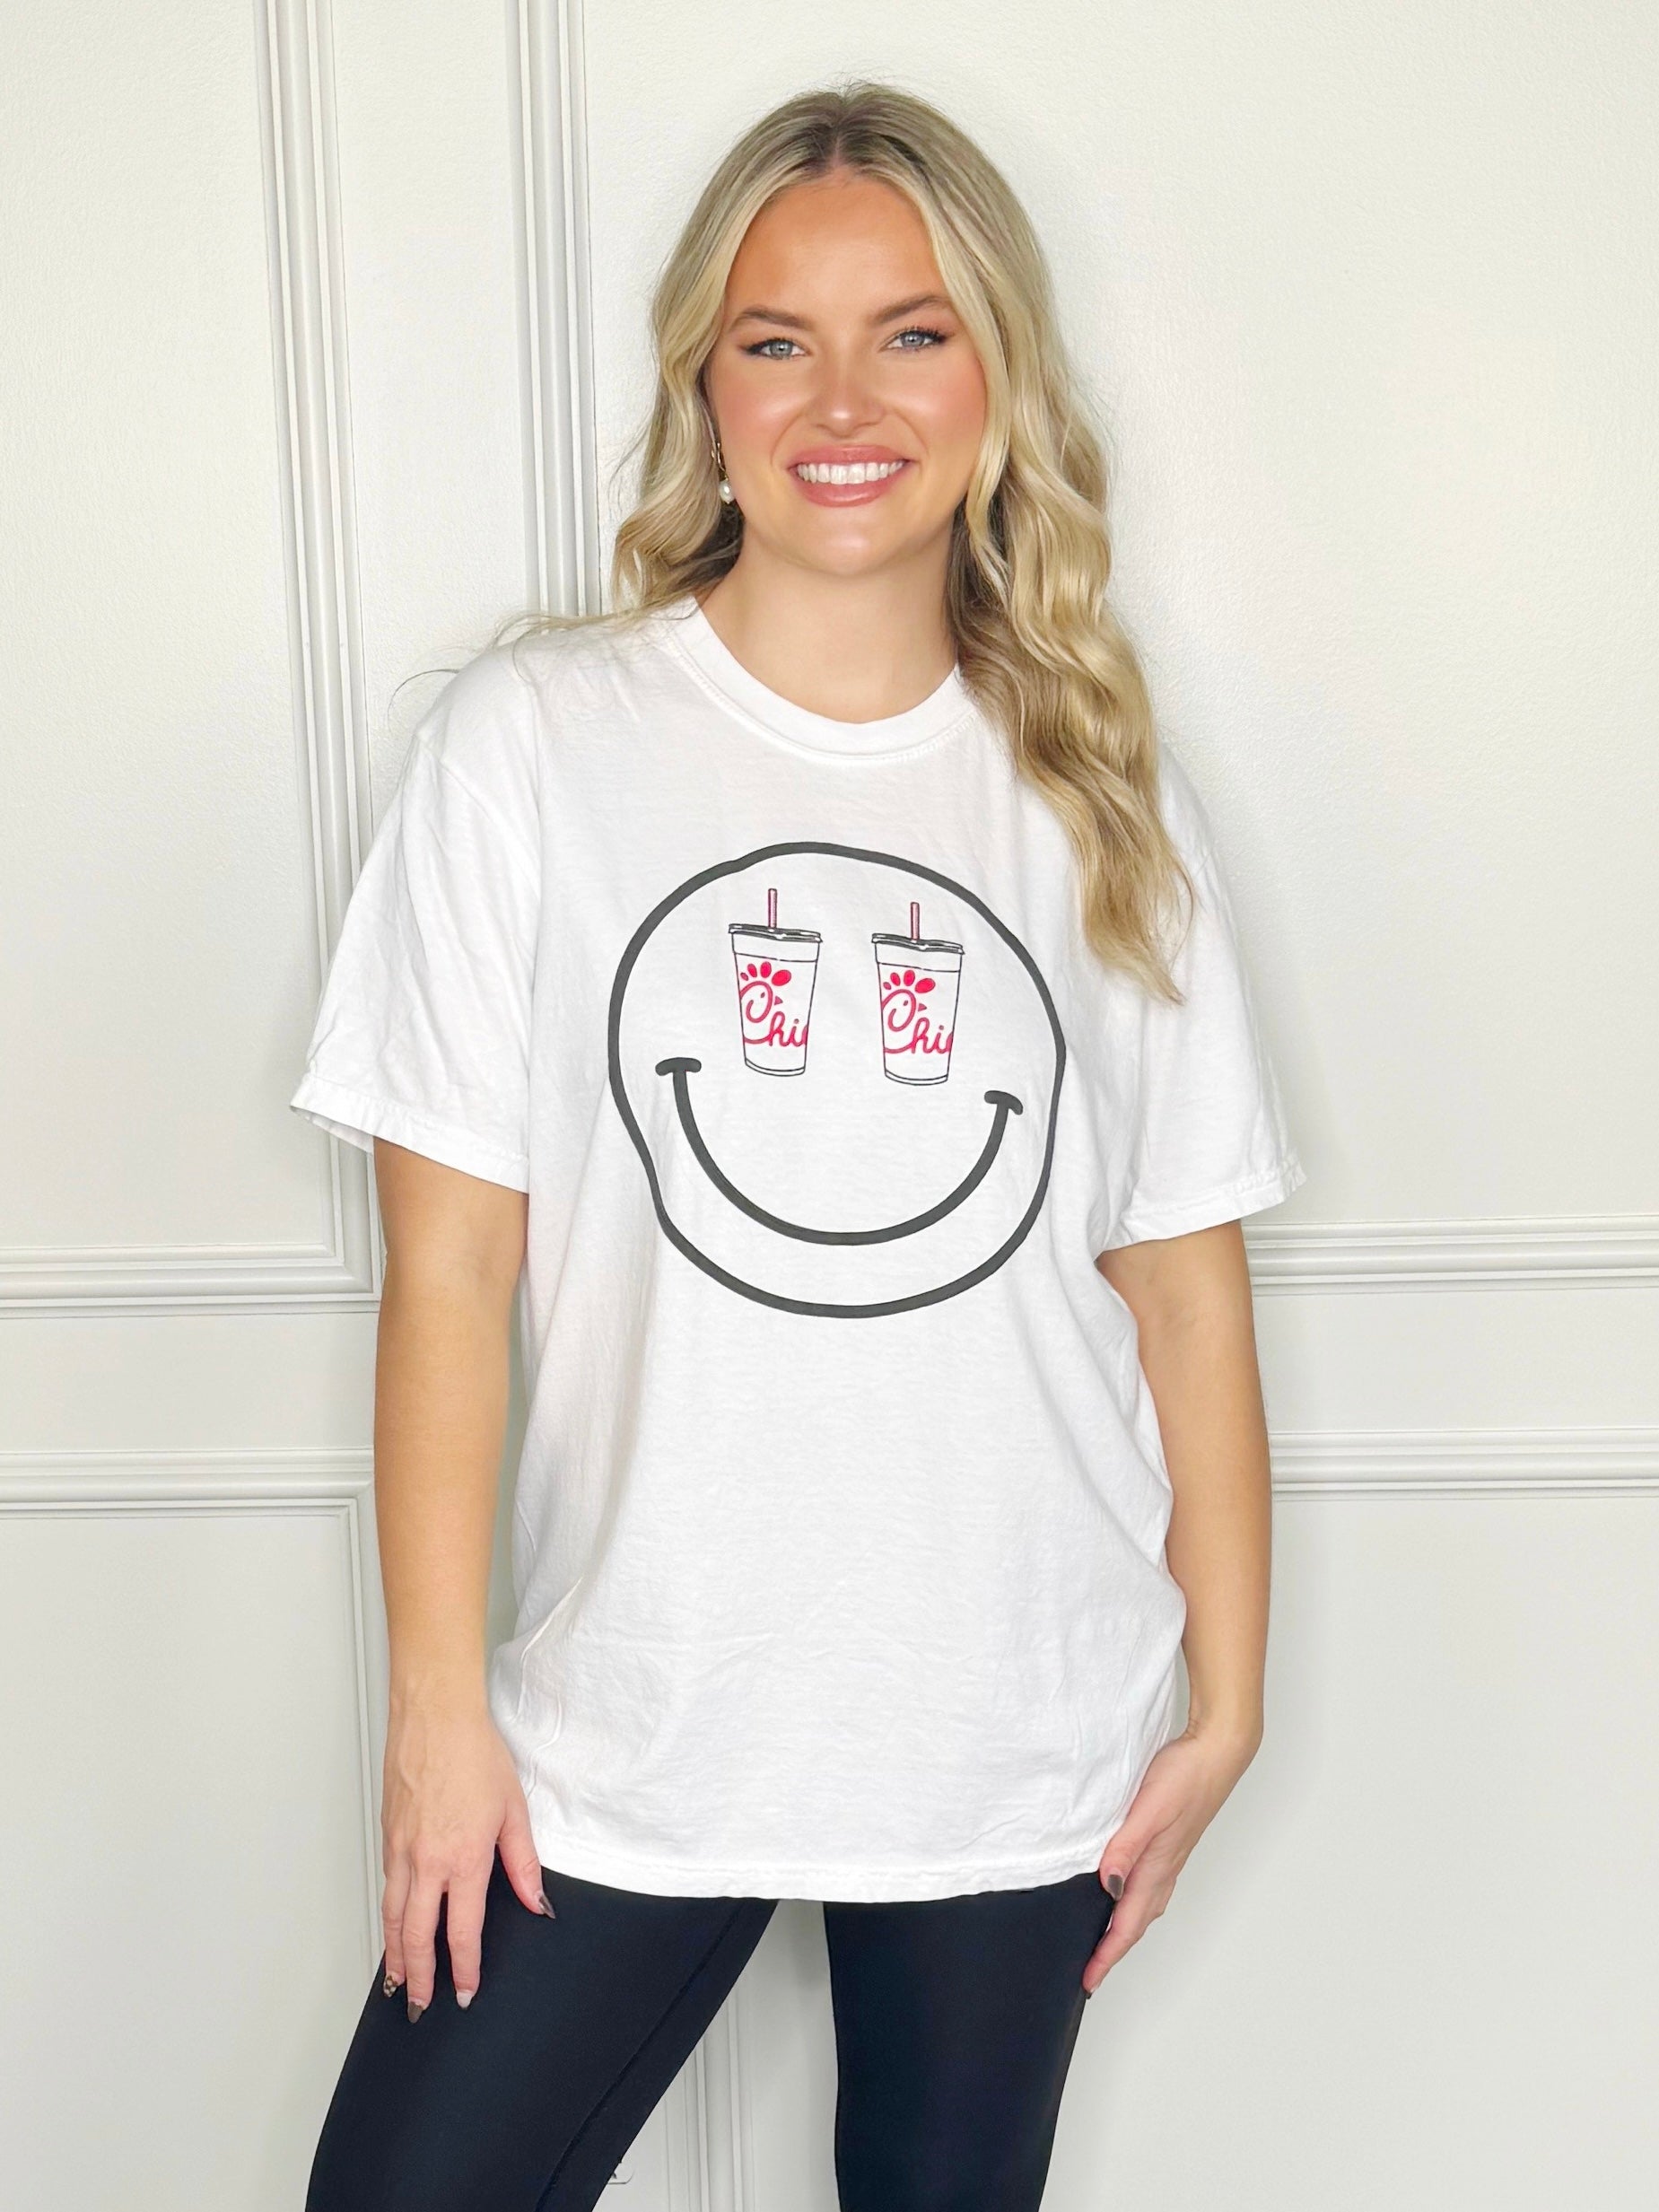 Puff Smiley Chick-Fil-A Tee